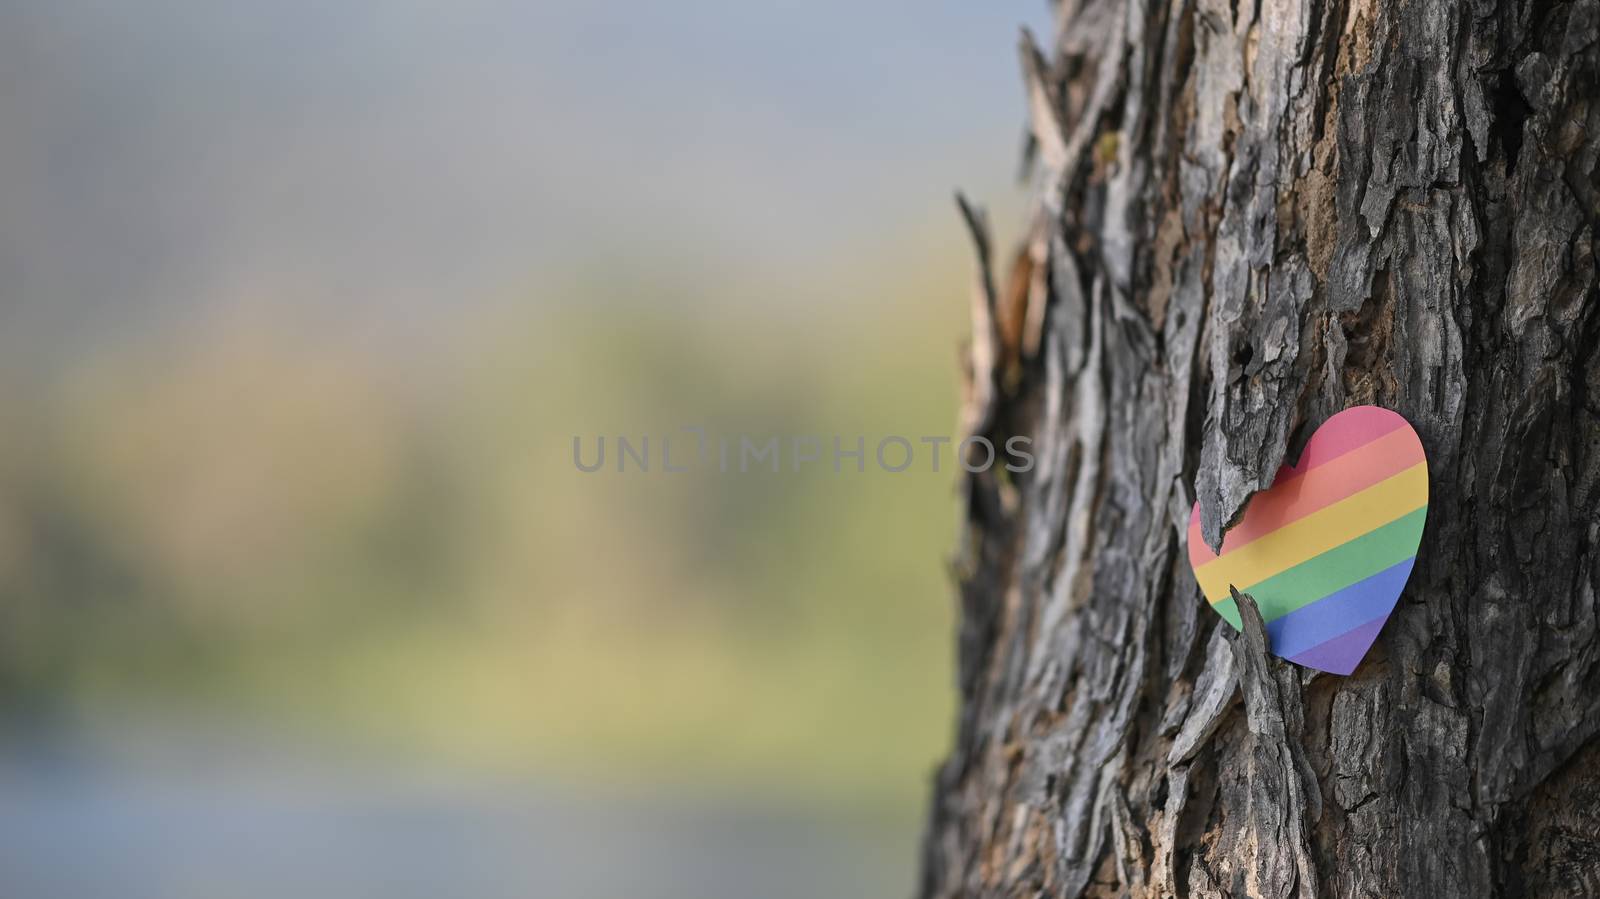 LGBT hearts symbol attached with bark of tree. LGBT happiness co by prathanchorruangsak